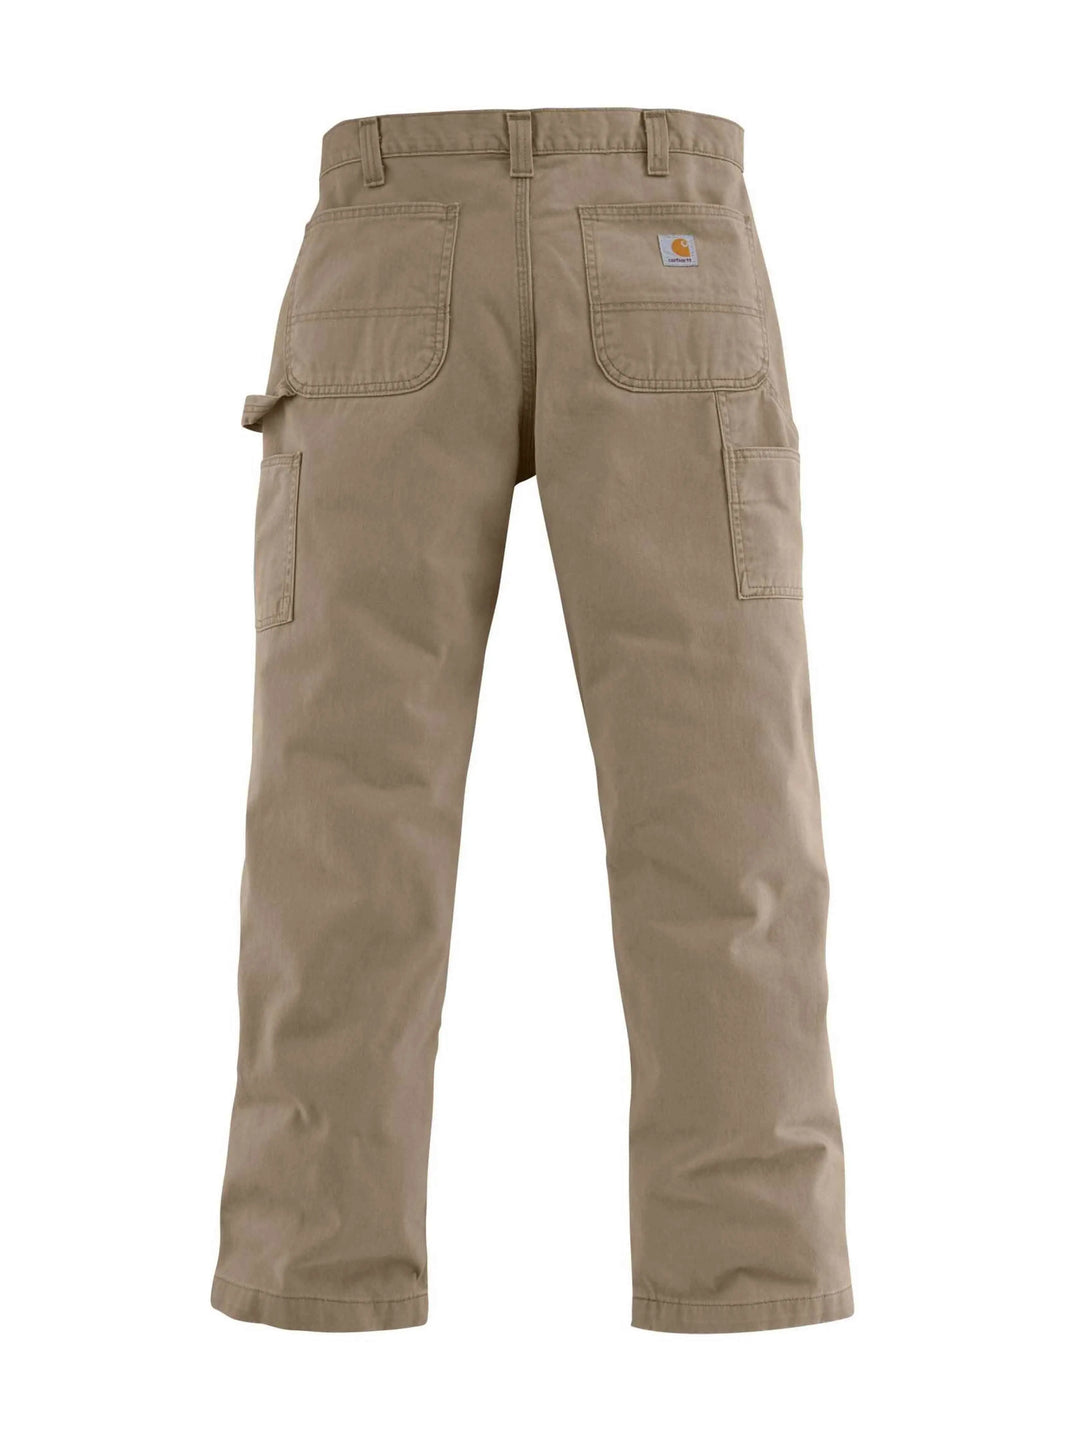 Carhartt Washed Twill Relaxed Fit Pant Field Khaki Prior